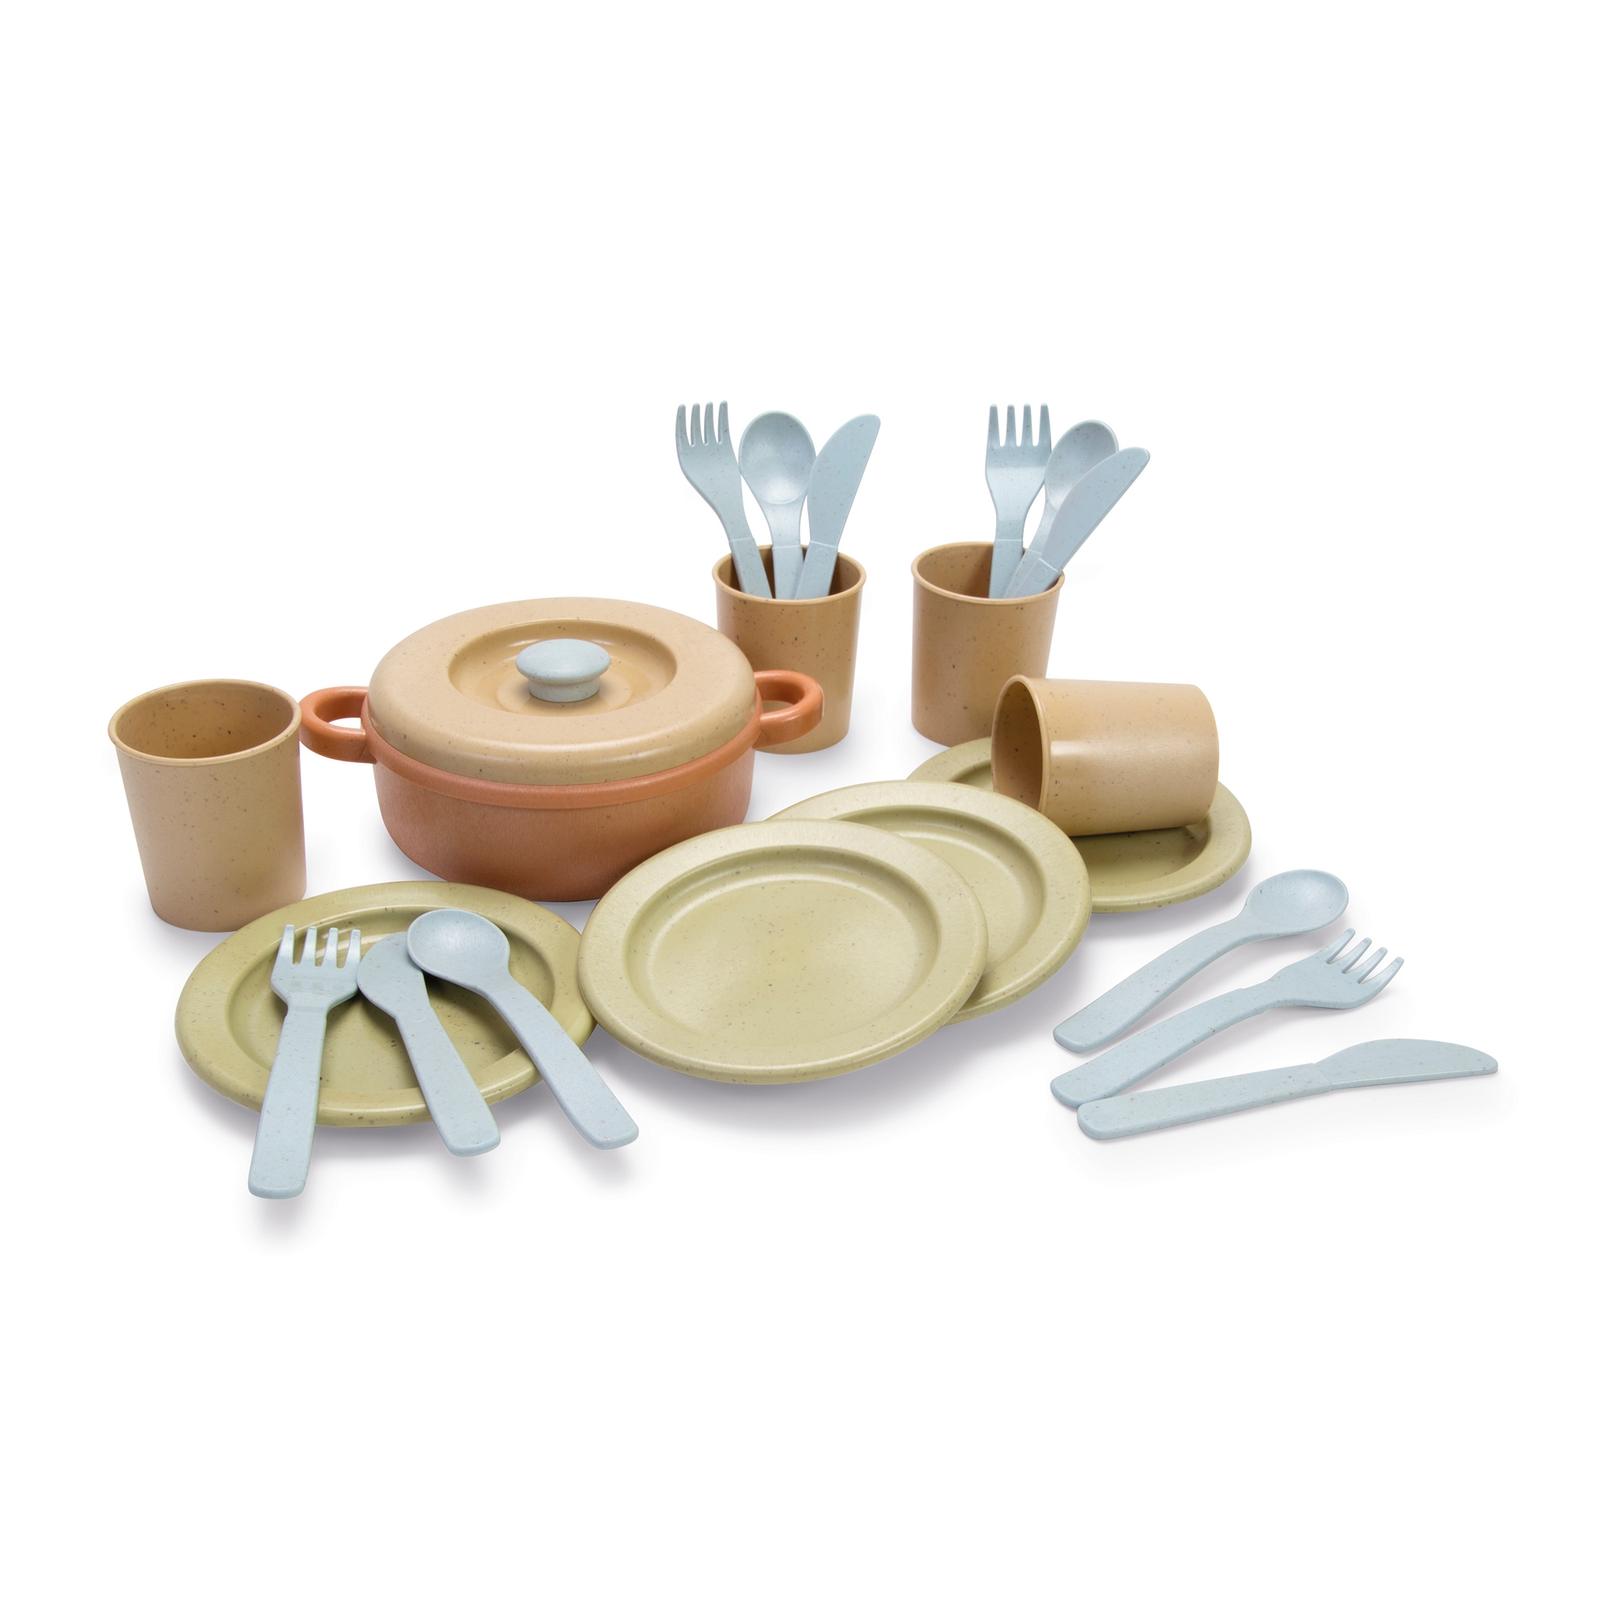 Dantoy Bioplastic Role Play Dinner Set - Assorted - Pack of 22